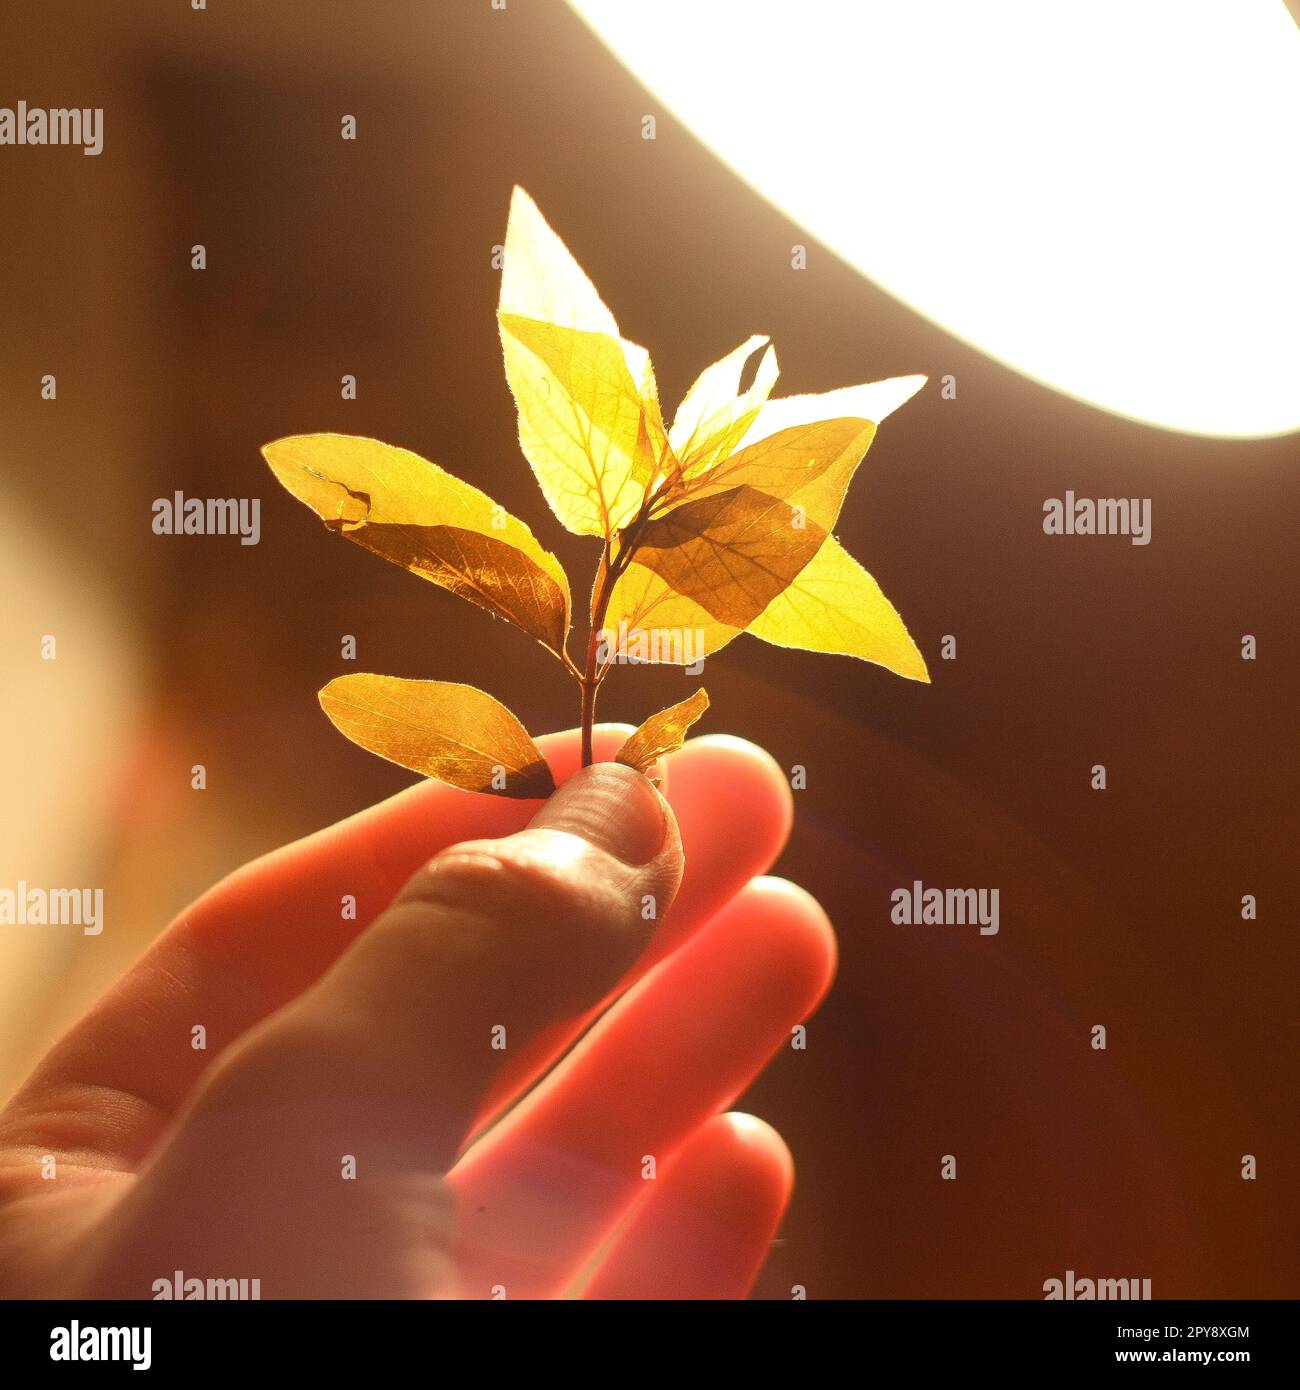 Close up fingers holding twig with leaves under bright lamp light concept photo Stock Photo